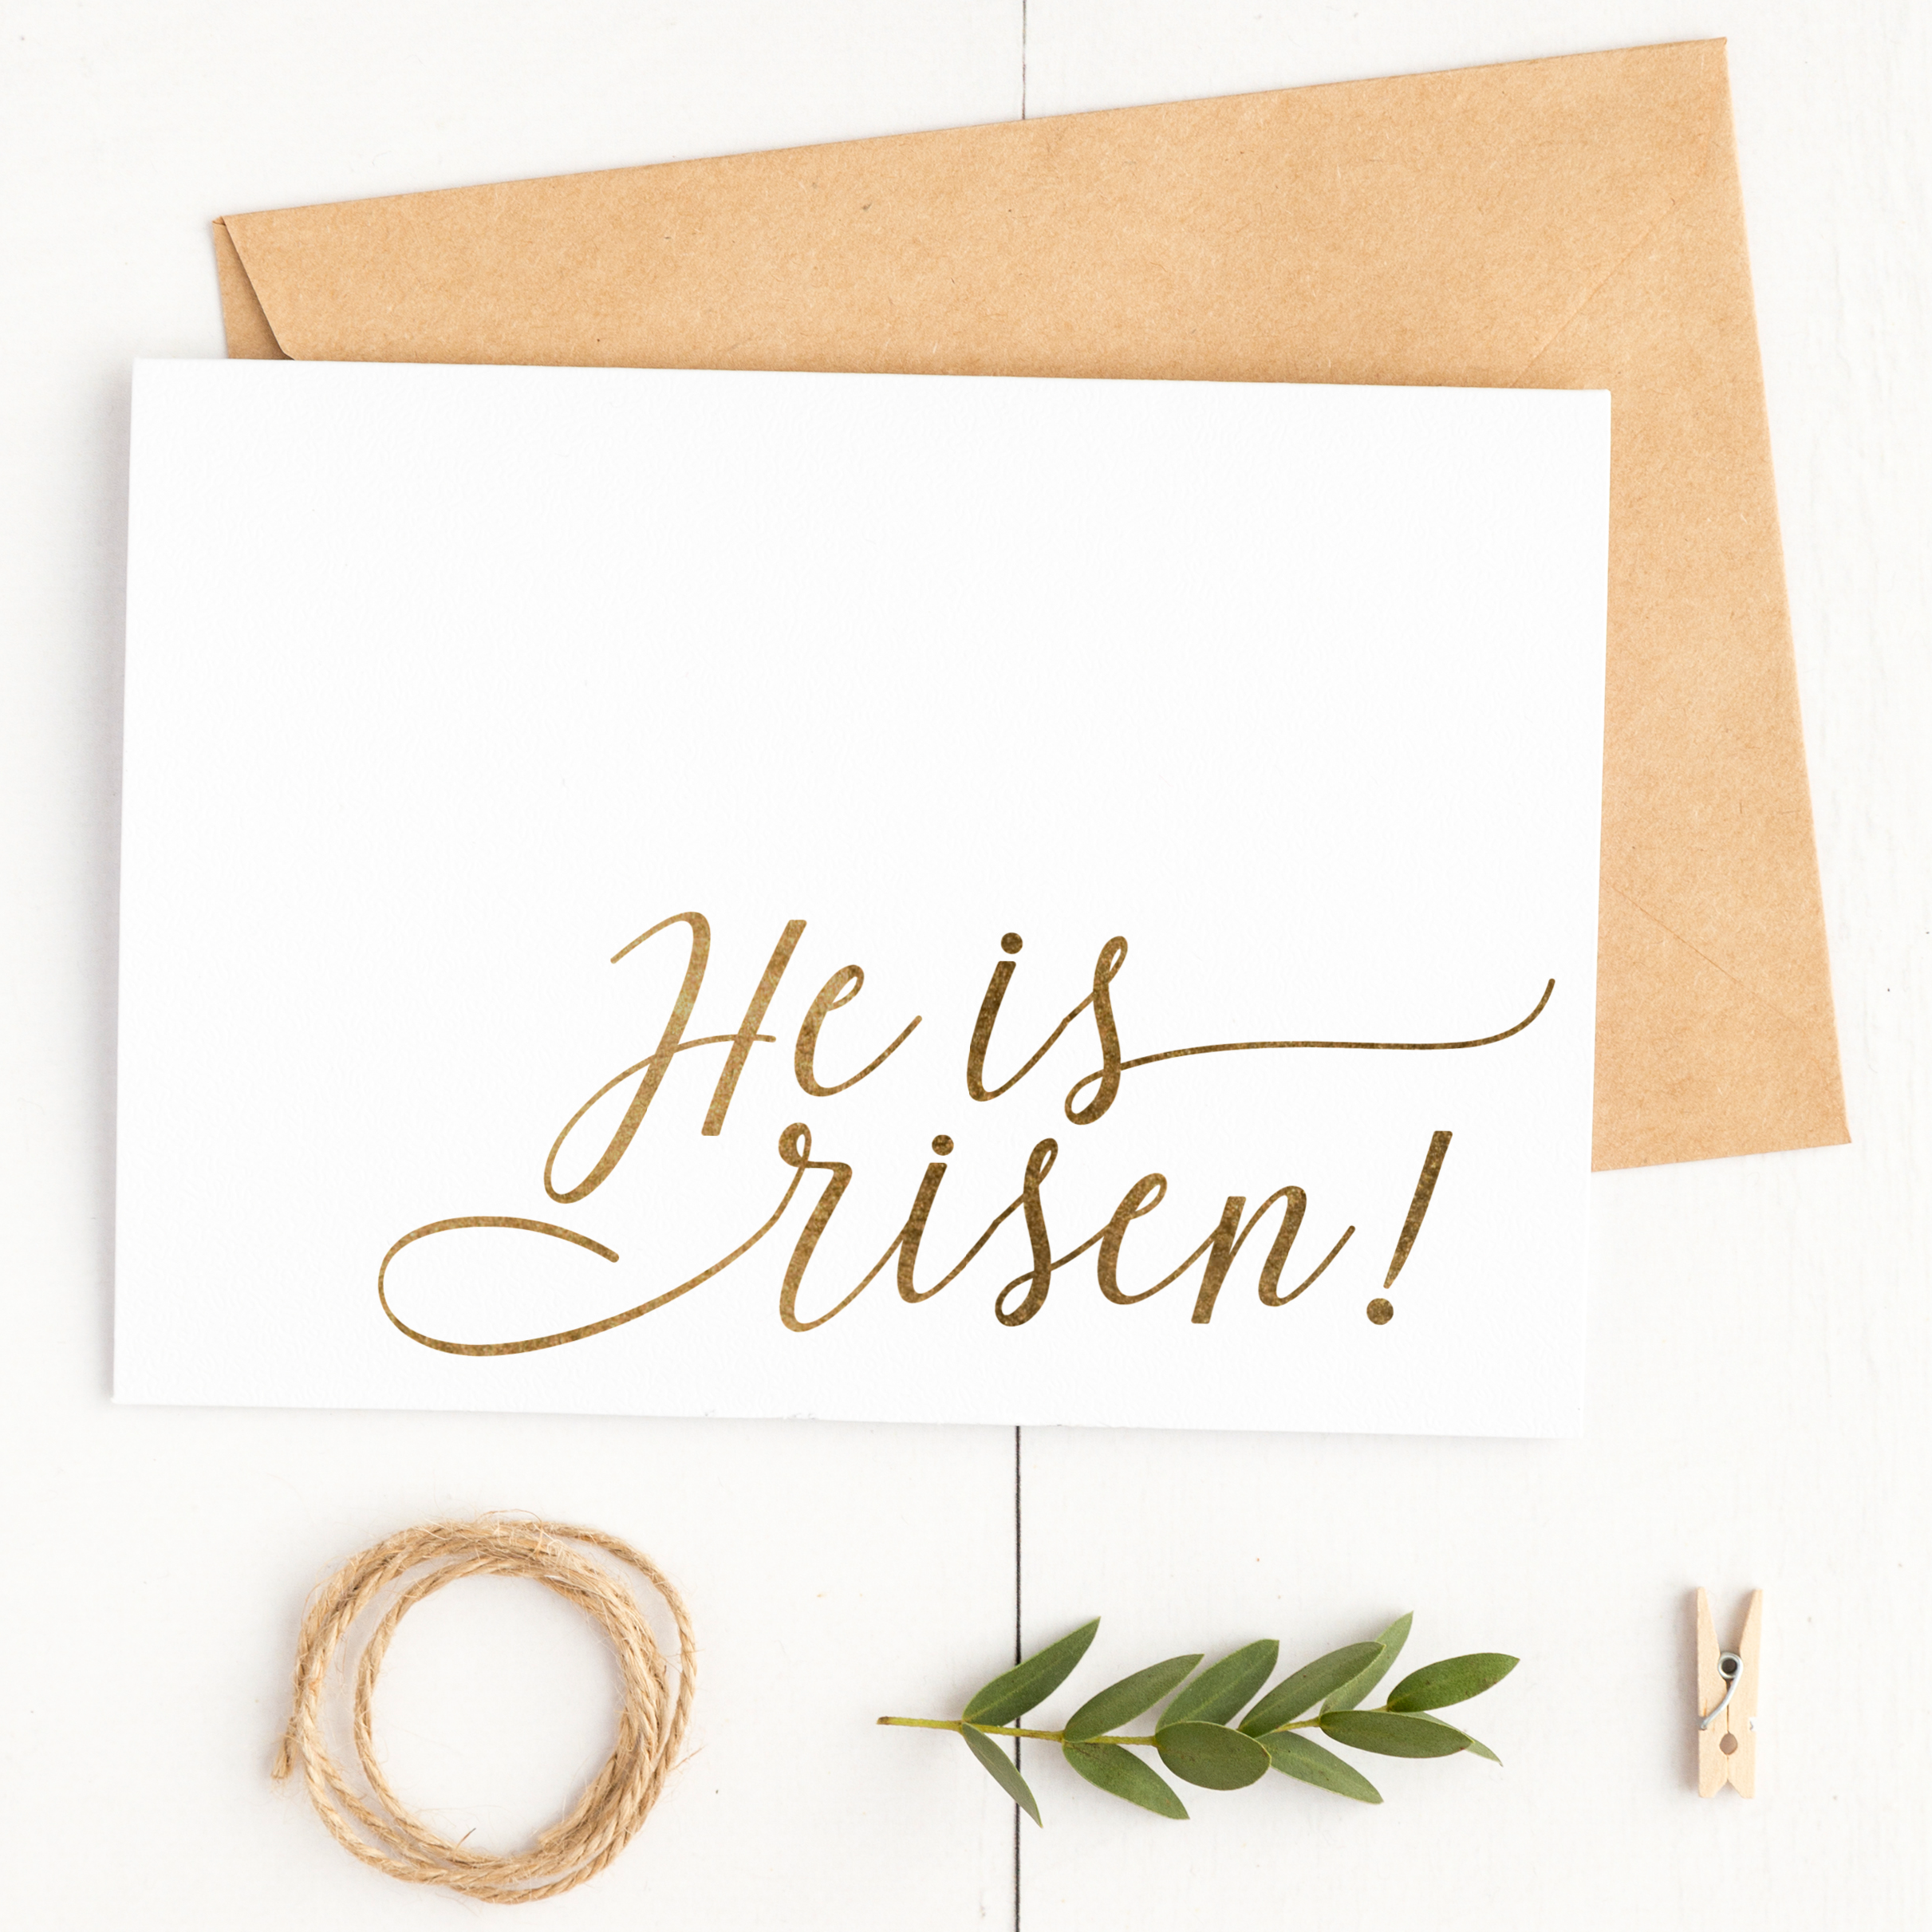 He is Risen easter card, envelope and twine